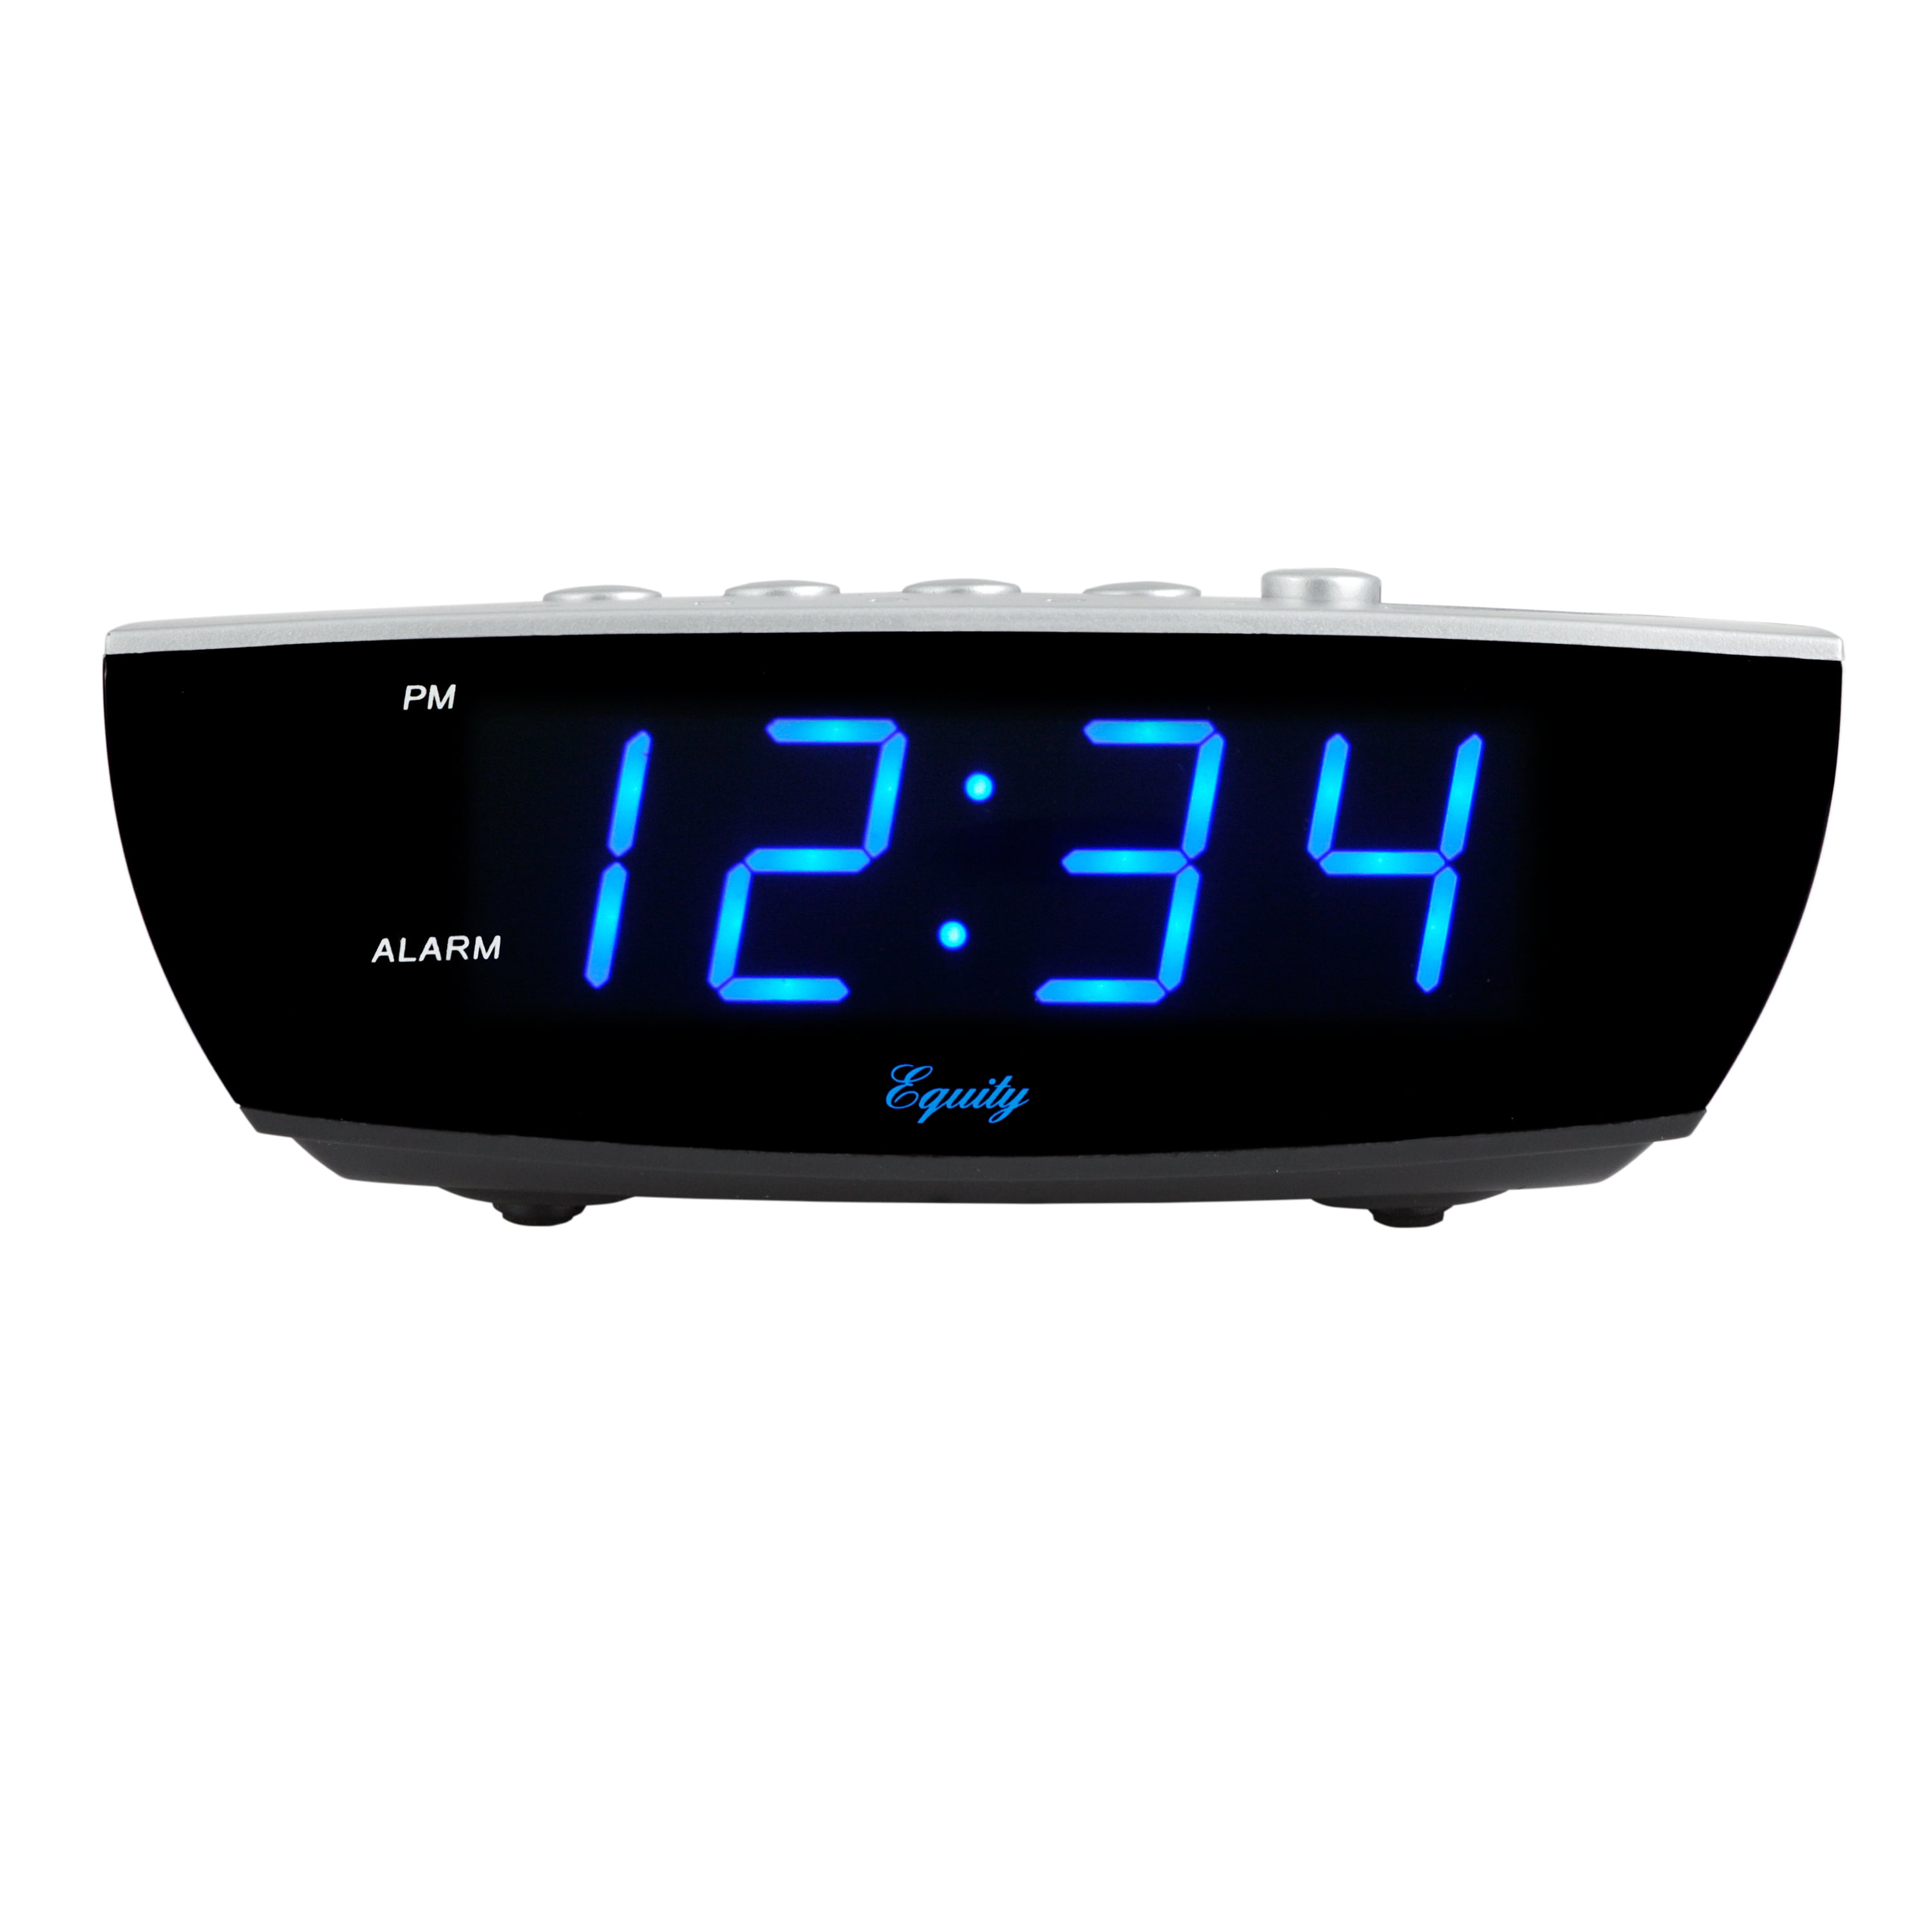 Details about   Led Alarm Clock Volleyball Fire Creative Digital Desk Clock for Kids Toy Gift 